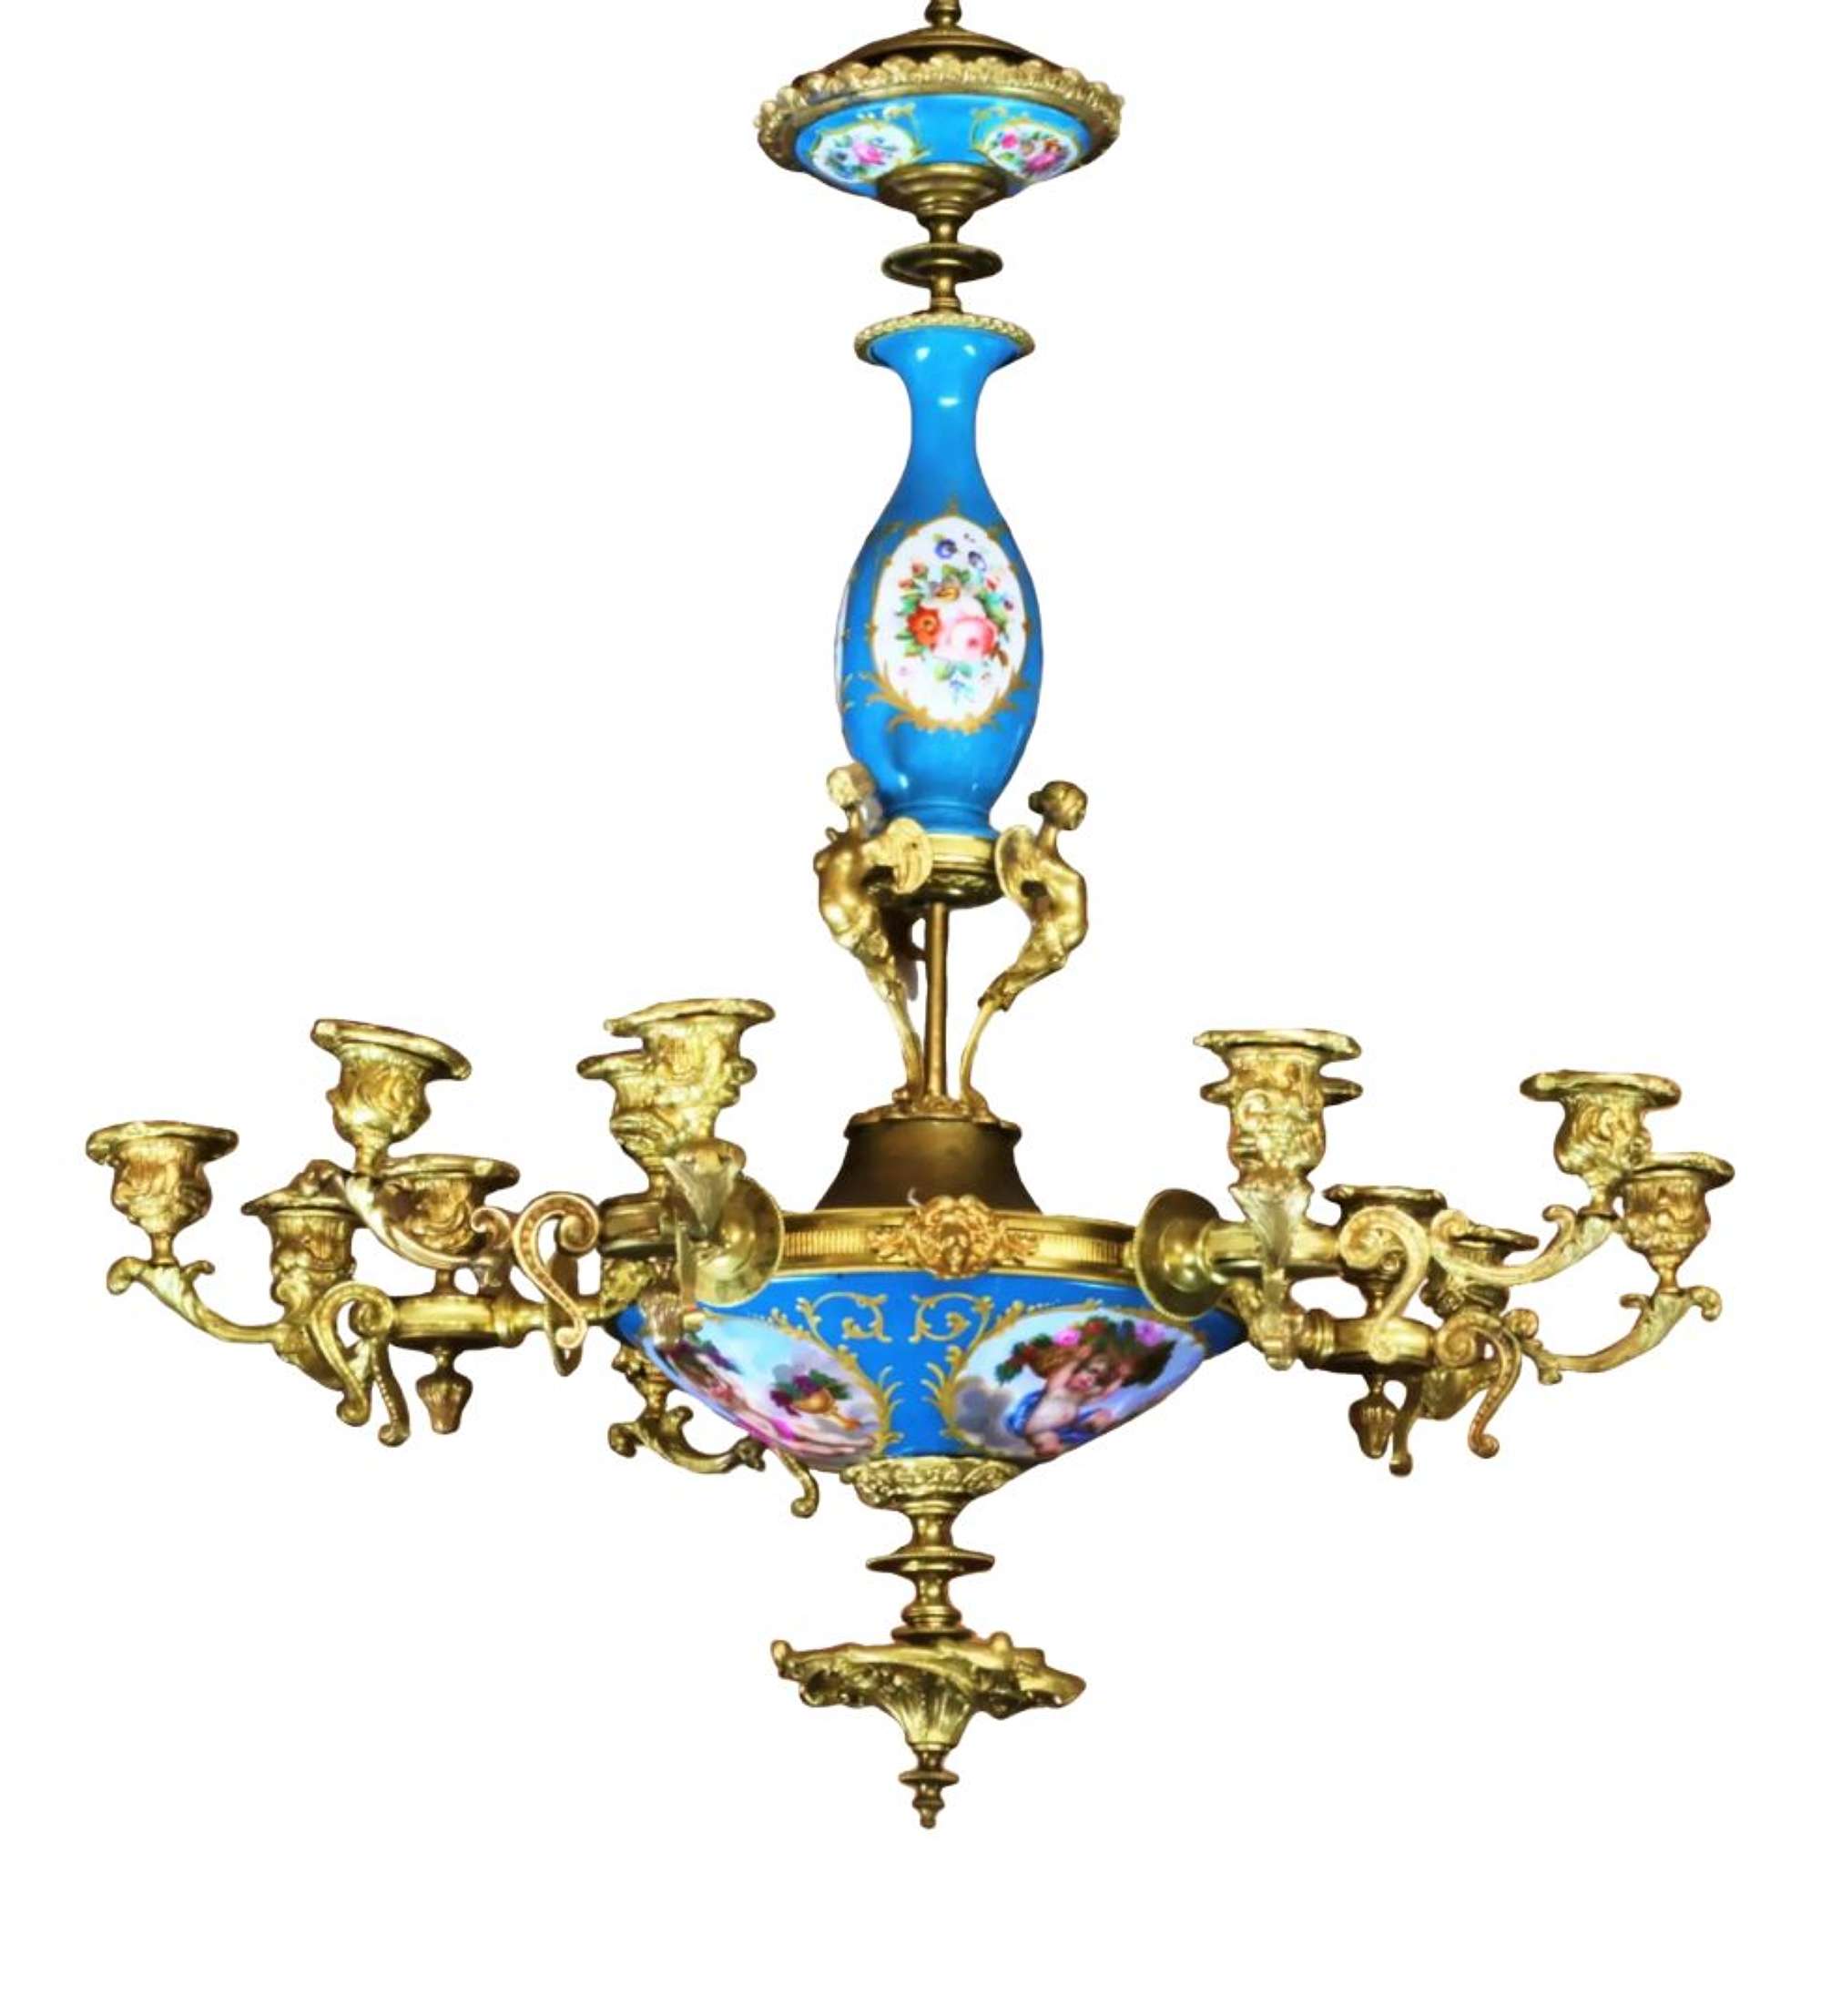 Chandelier for 15 Candles from Sevres in the Style of Louis XVI